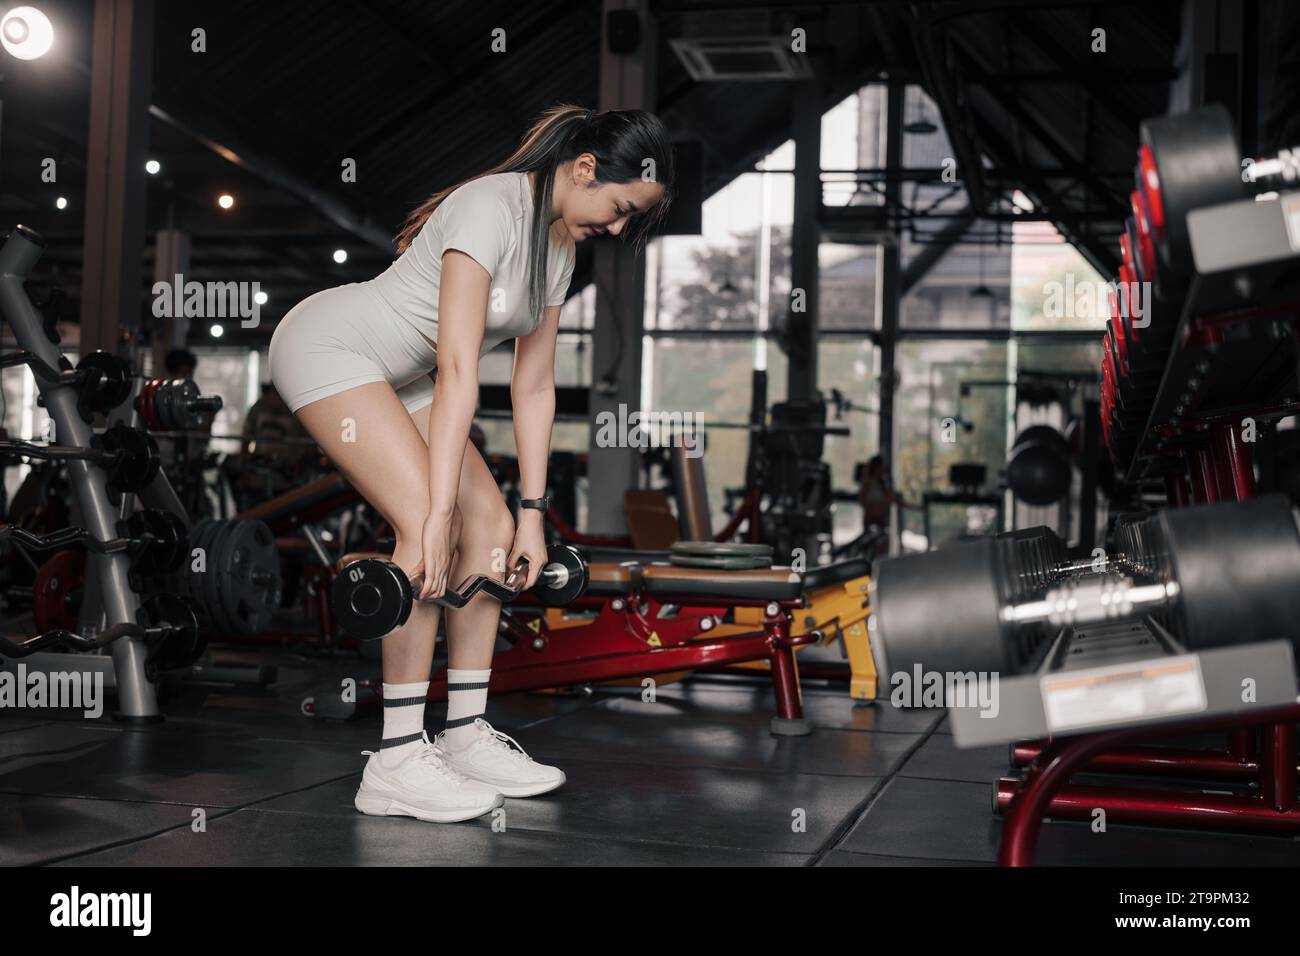 Young Asian woman lifting weights in the gym. Stock Photo